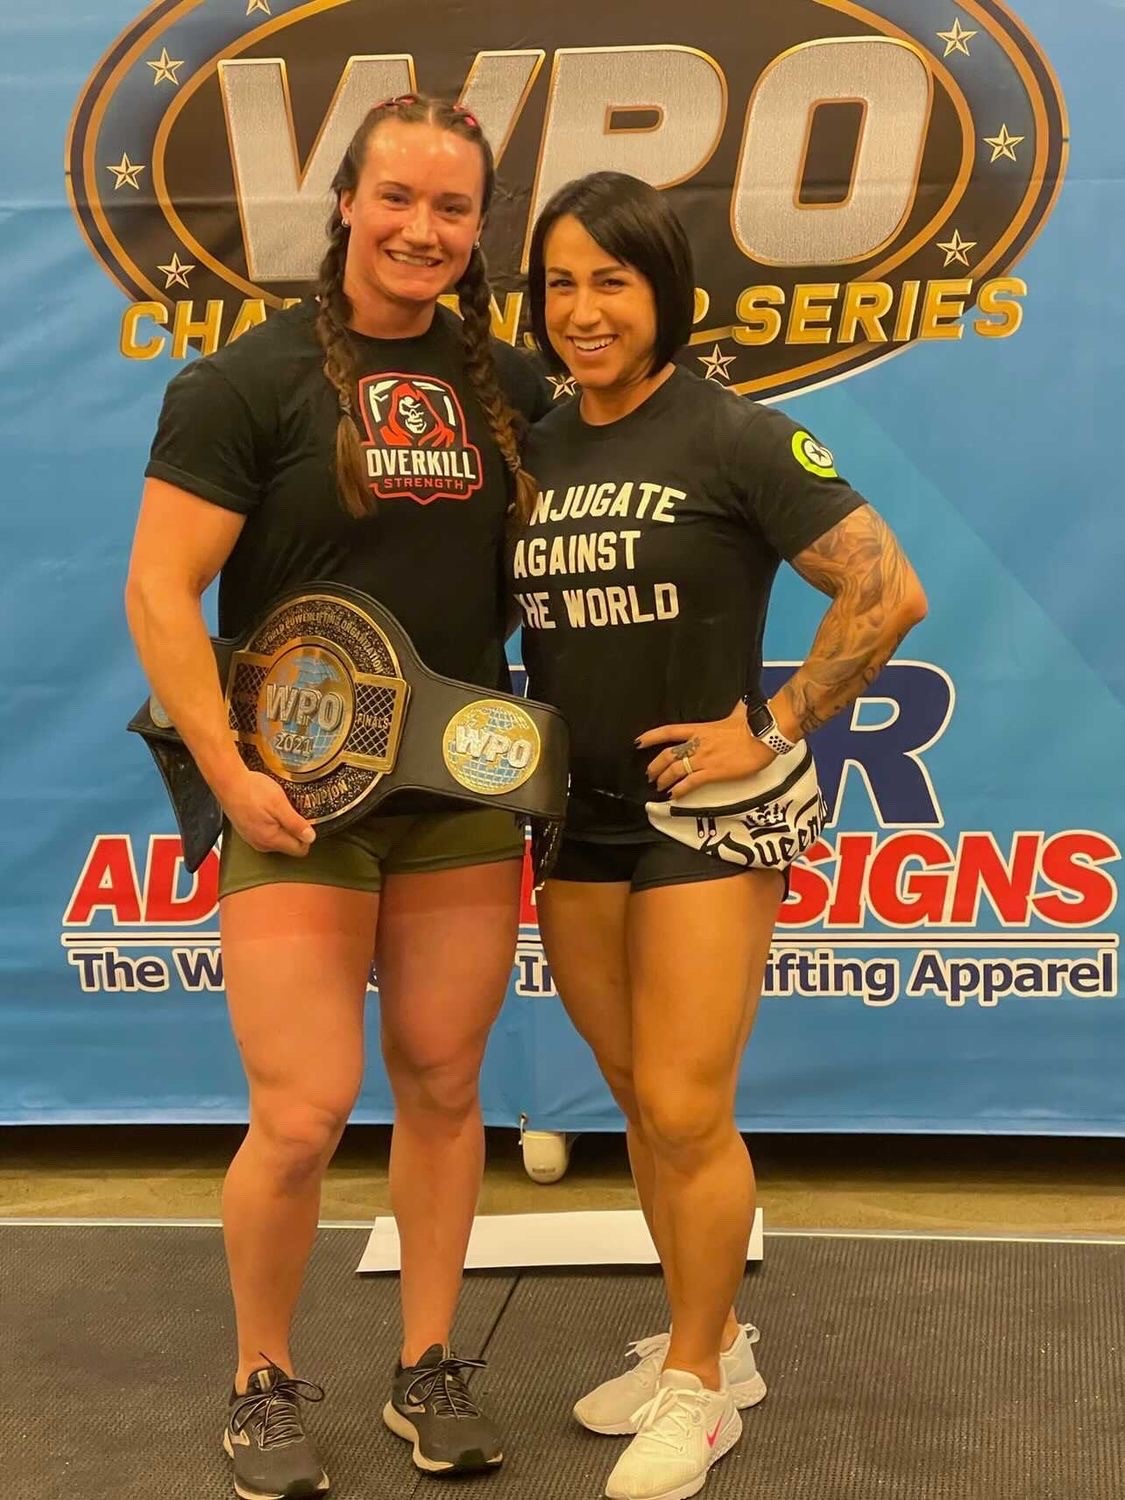 Woman Breaks Powerlifting All Time